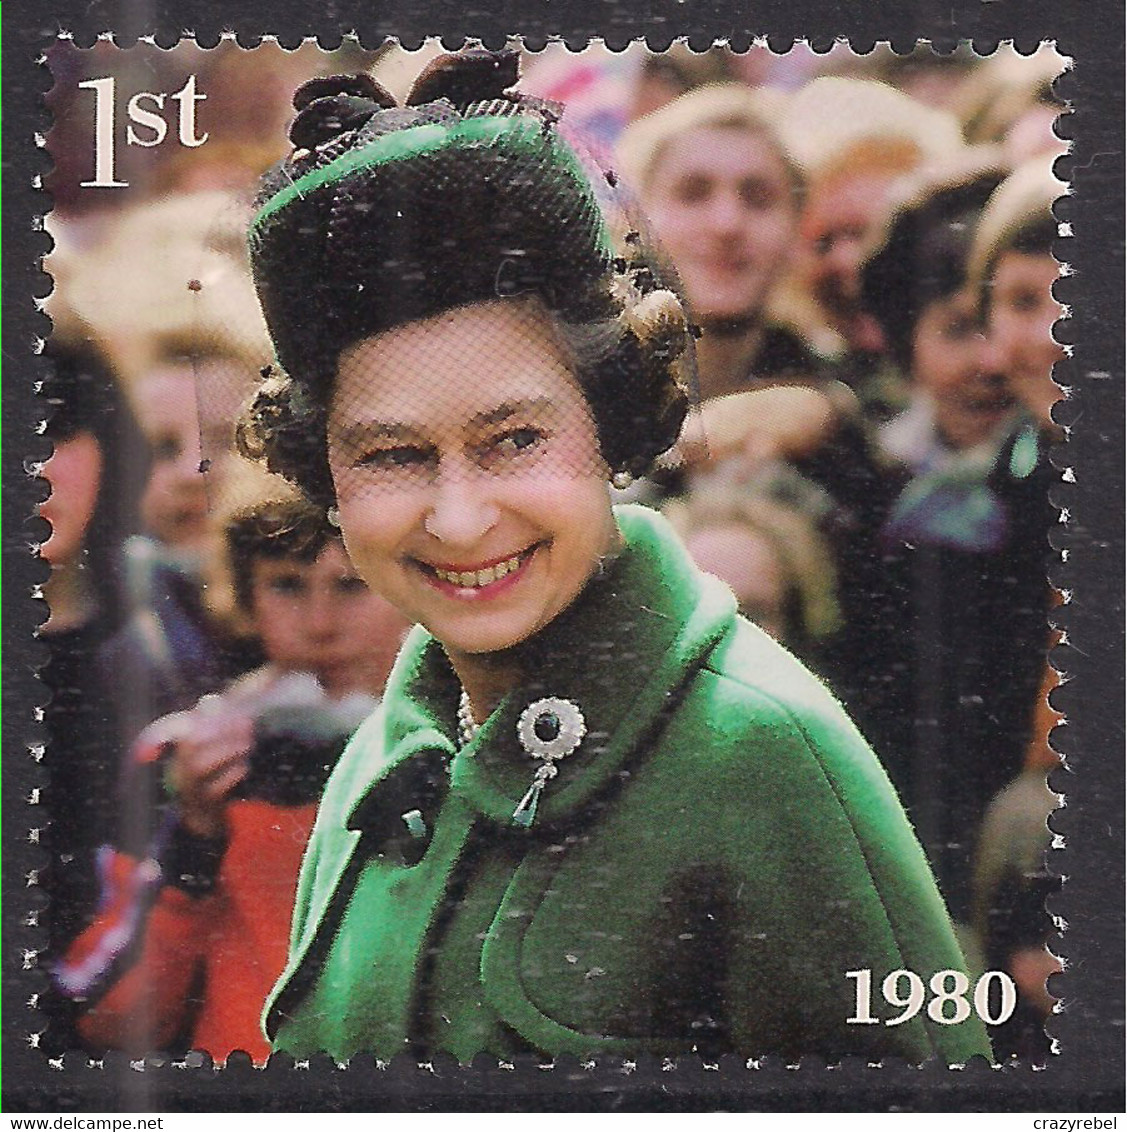 GB 2022 QE2 1st Her Majesty The Queens Platinum Jubilee Umm  SG 4629 ( R675 ) - Unused Stamps